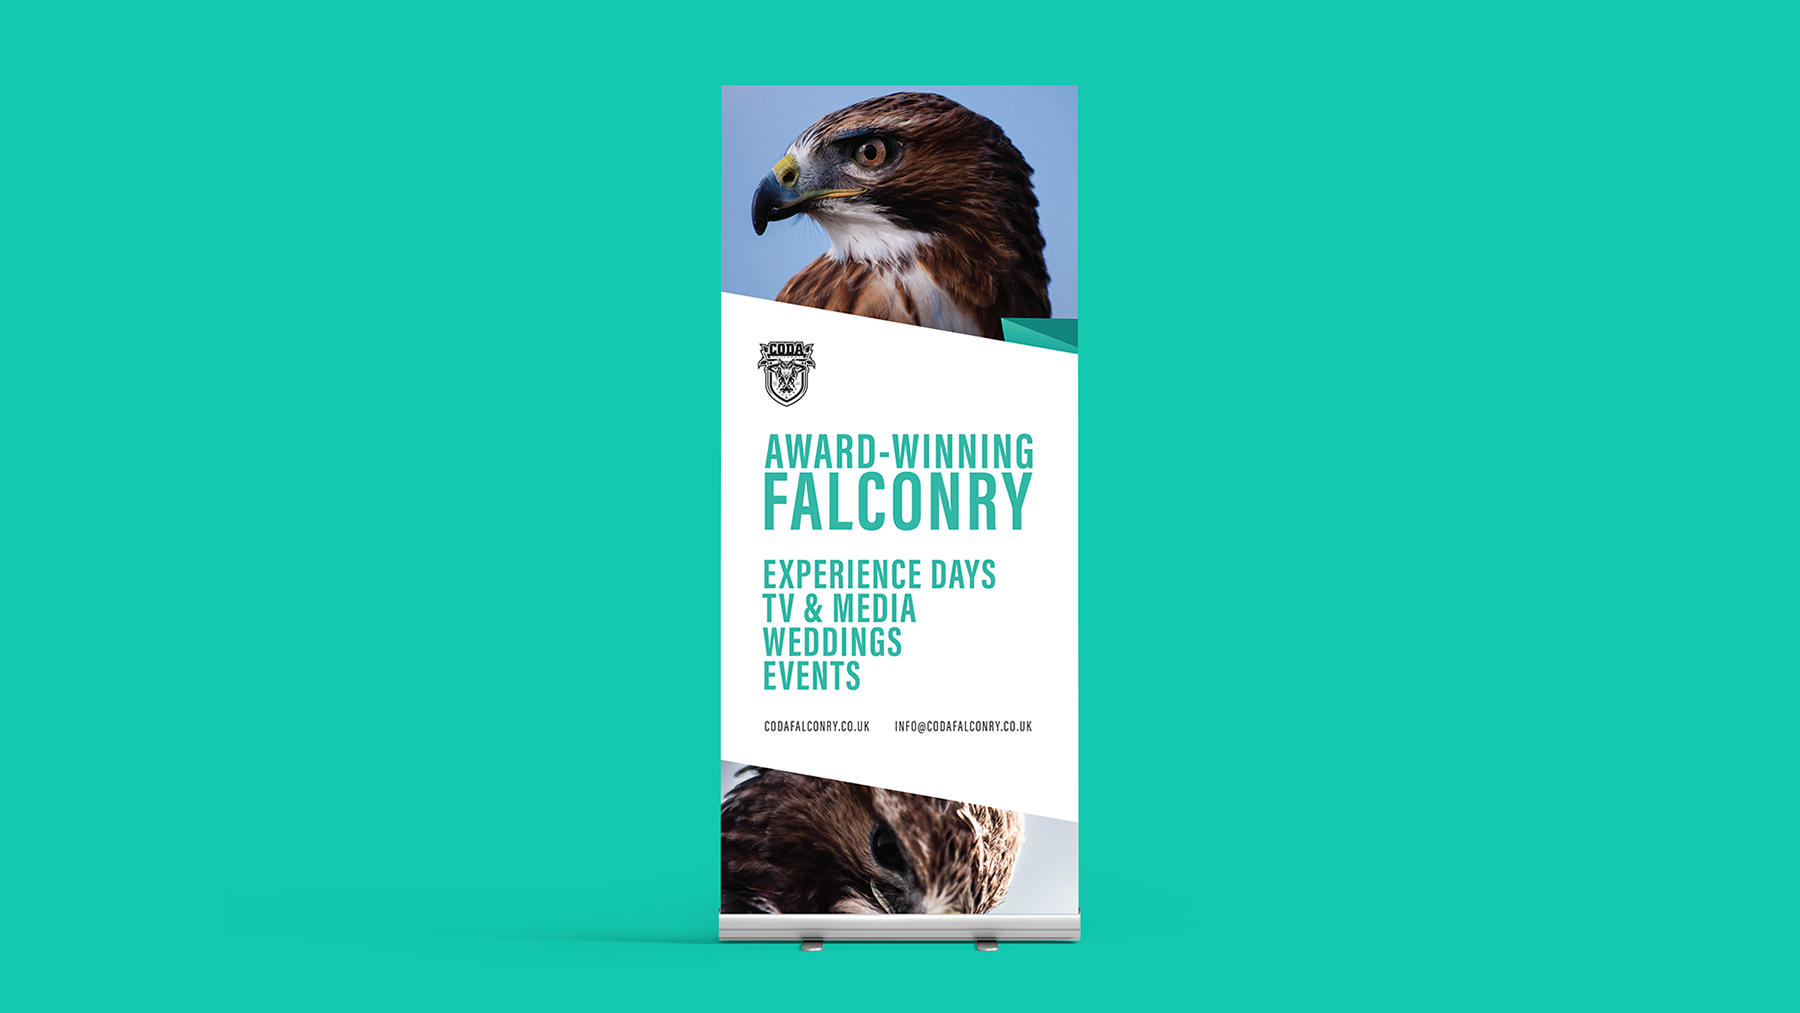 Roller banner design featuring a red-tailed hawk for Coda Falconry.